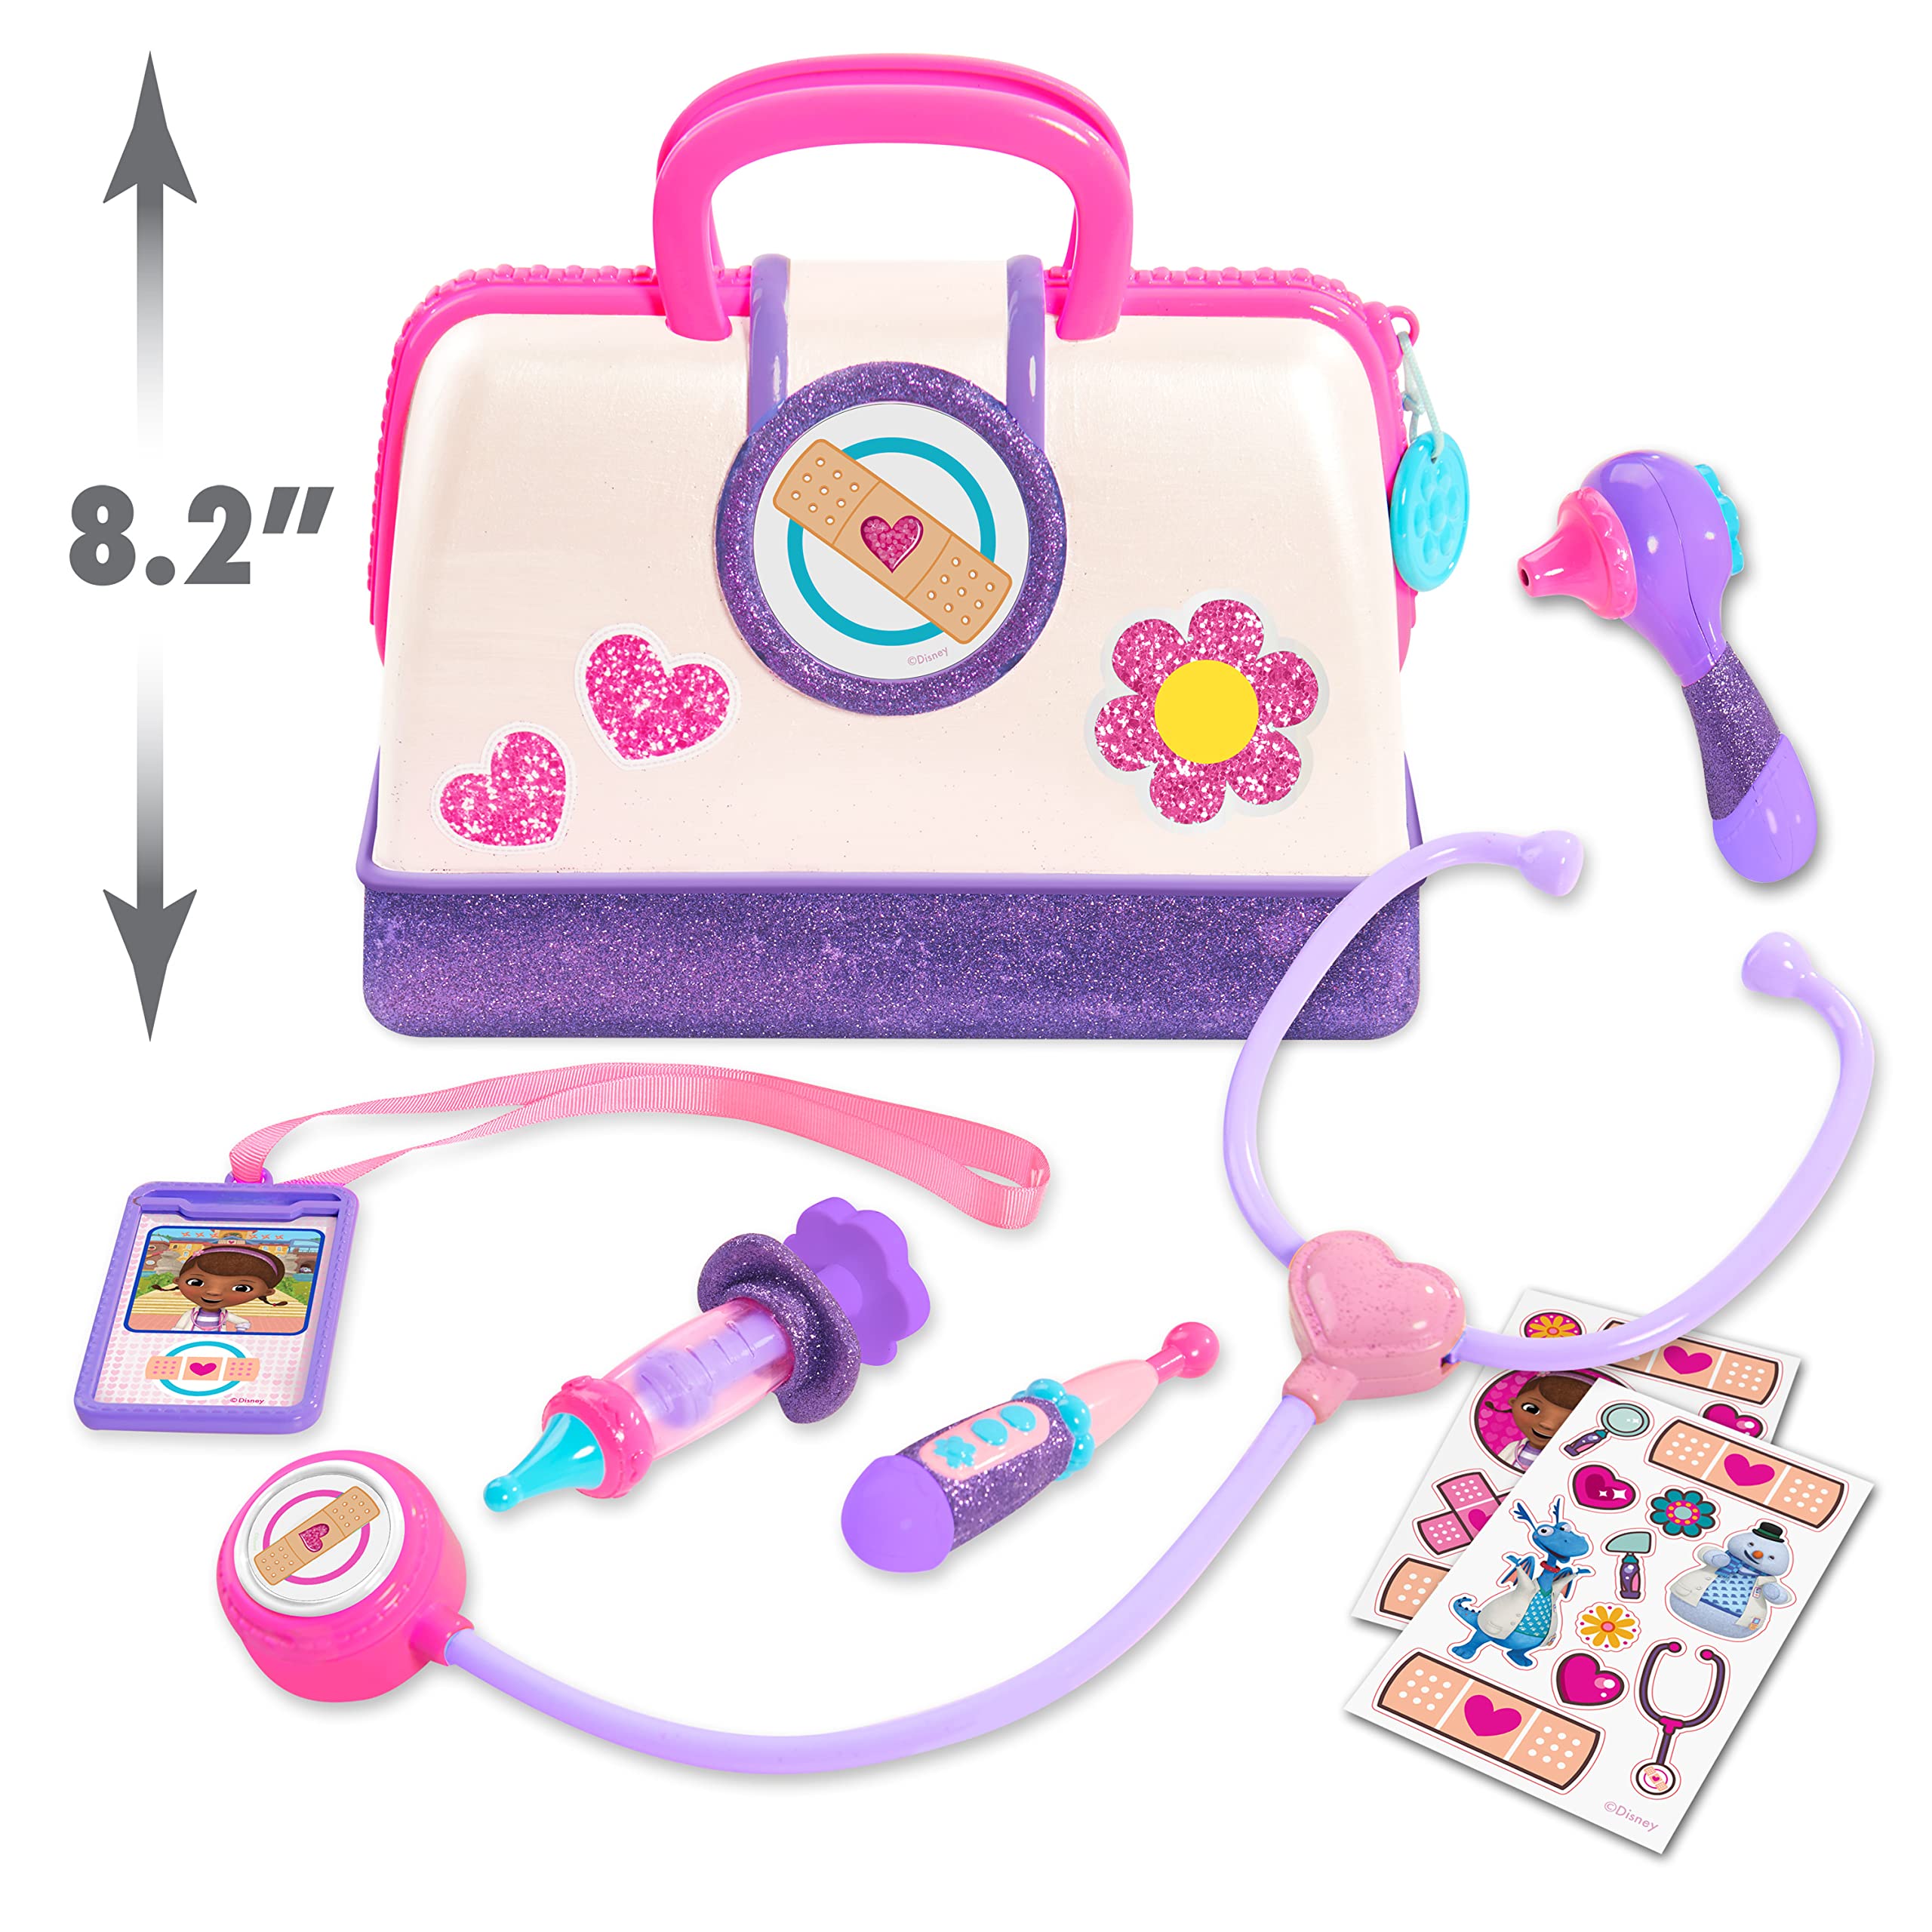 Disney Junior Doc McStuffins Toy Hospital Doctor's Bag Set, 7-piece Dress Up and Pretend Play Doctor Kit, Officially Licensed Kids Toys for Ages 3 Up, Gifts and Presents by Just Play